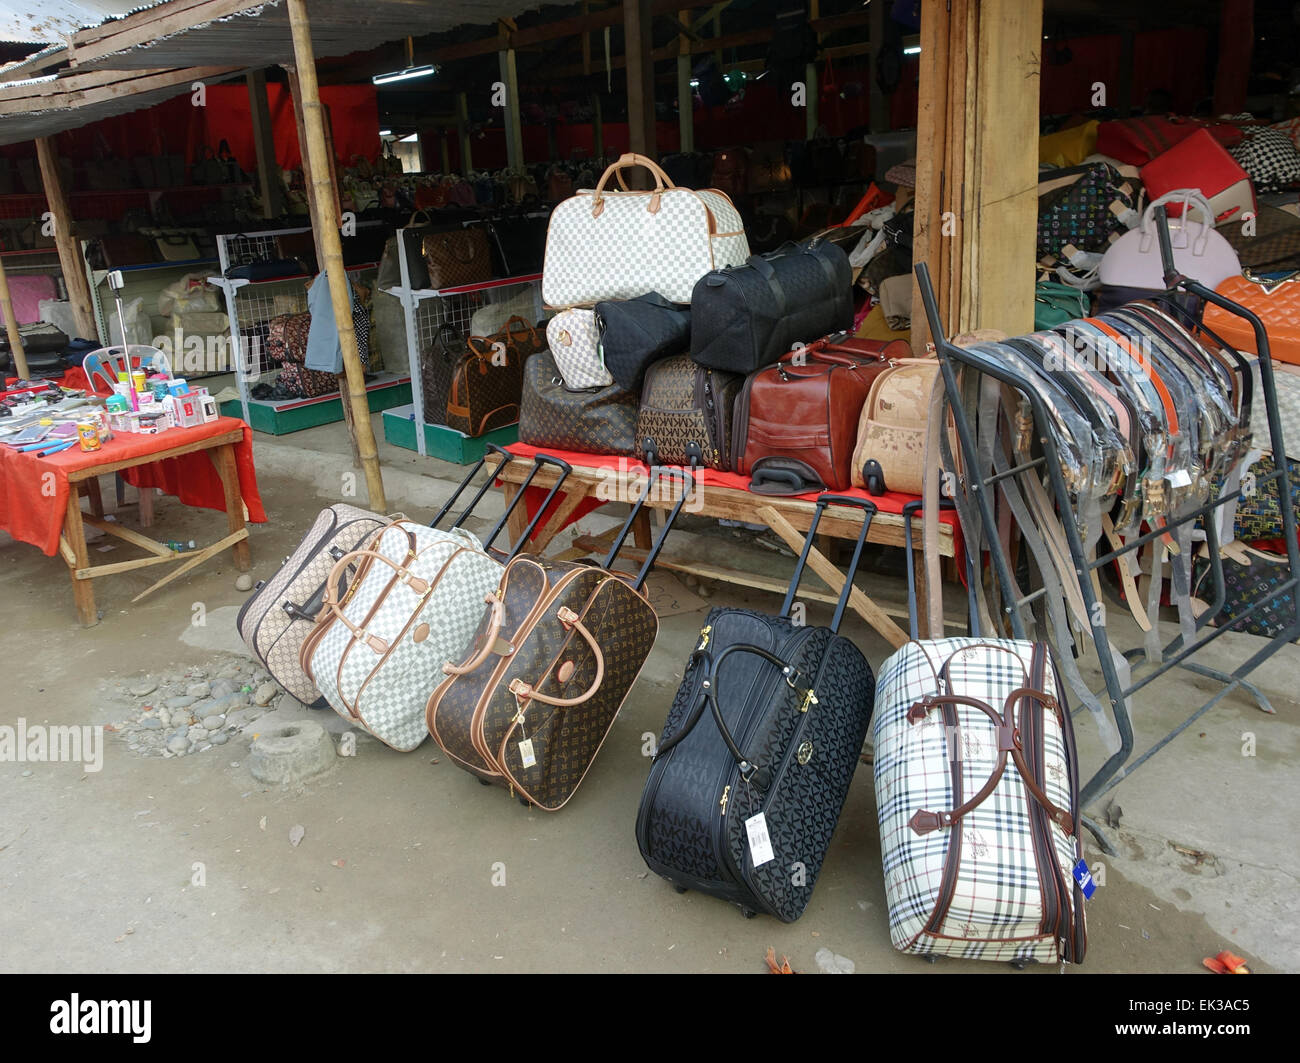 Don Sao, Laos. 25th Feb, 2015. Counterfeit brand products, such as bags and suitcases, are sold on a marketplace in Don Sao, Laos, 25 February 2015. Photo: Alexandra Schuler/dpa - NO WIRE SERVICE -/dpa/Alamy Live News Stock Photo